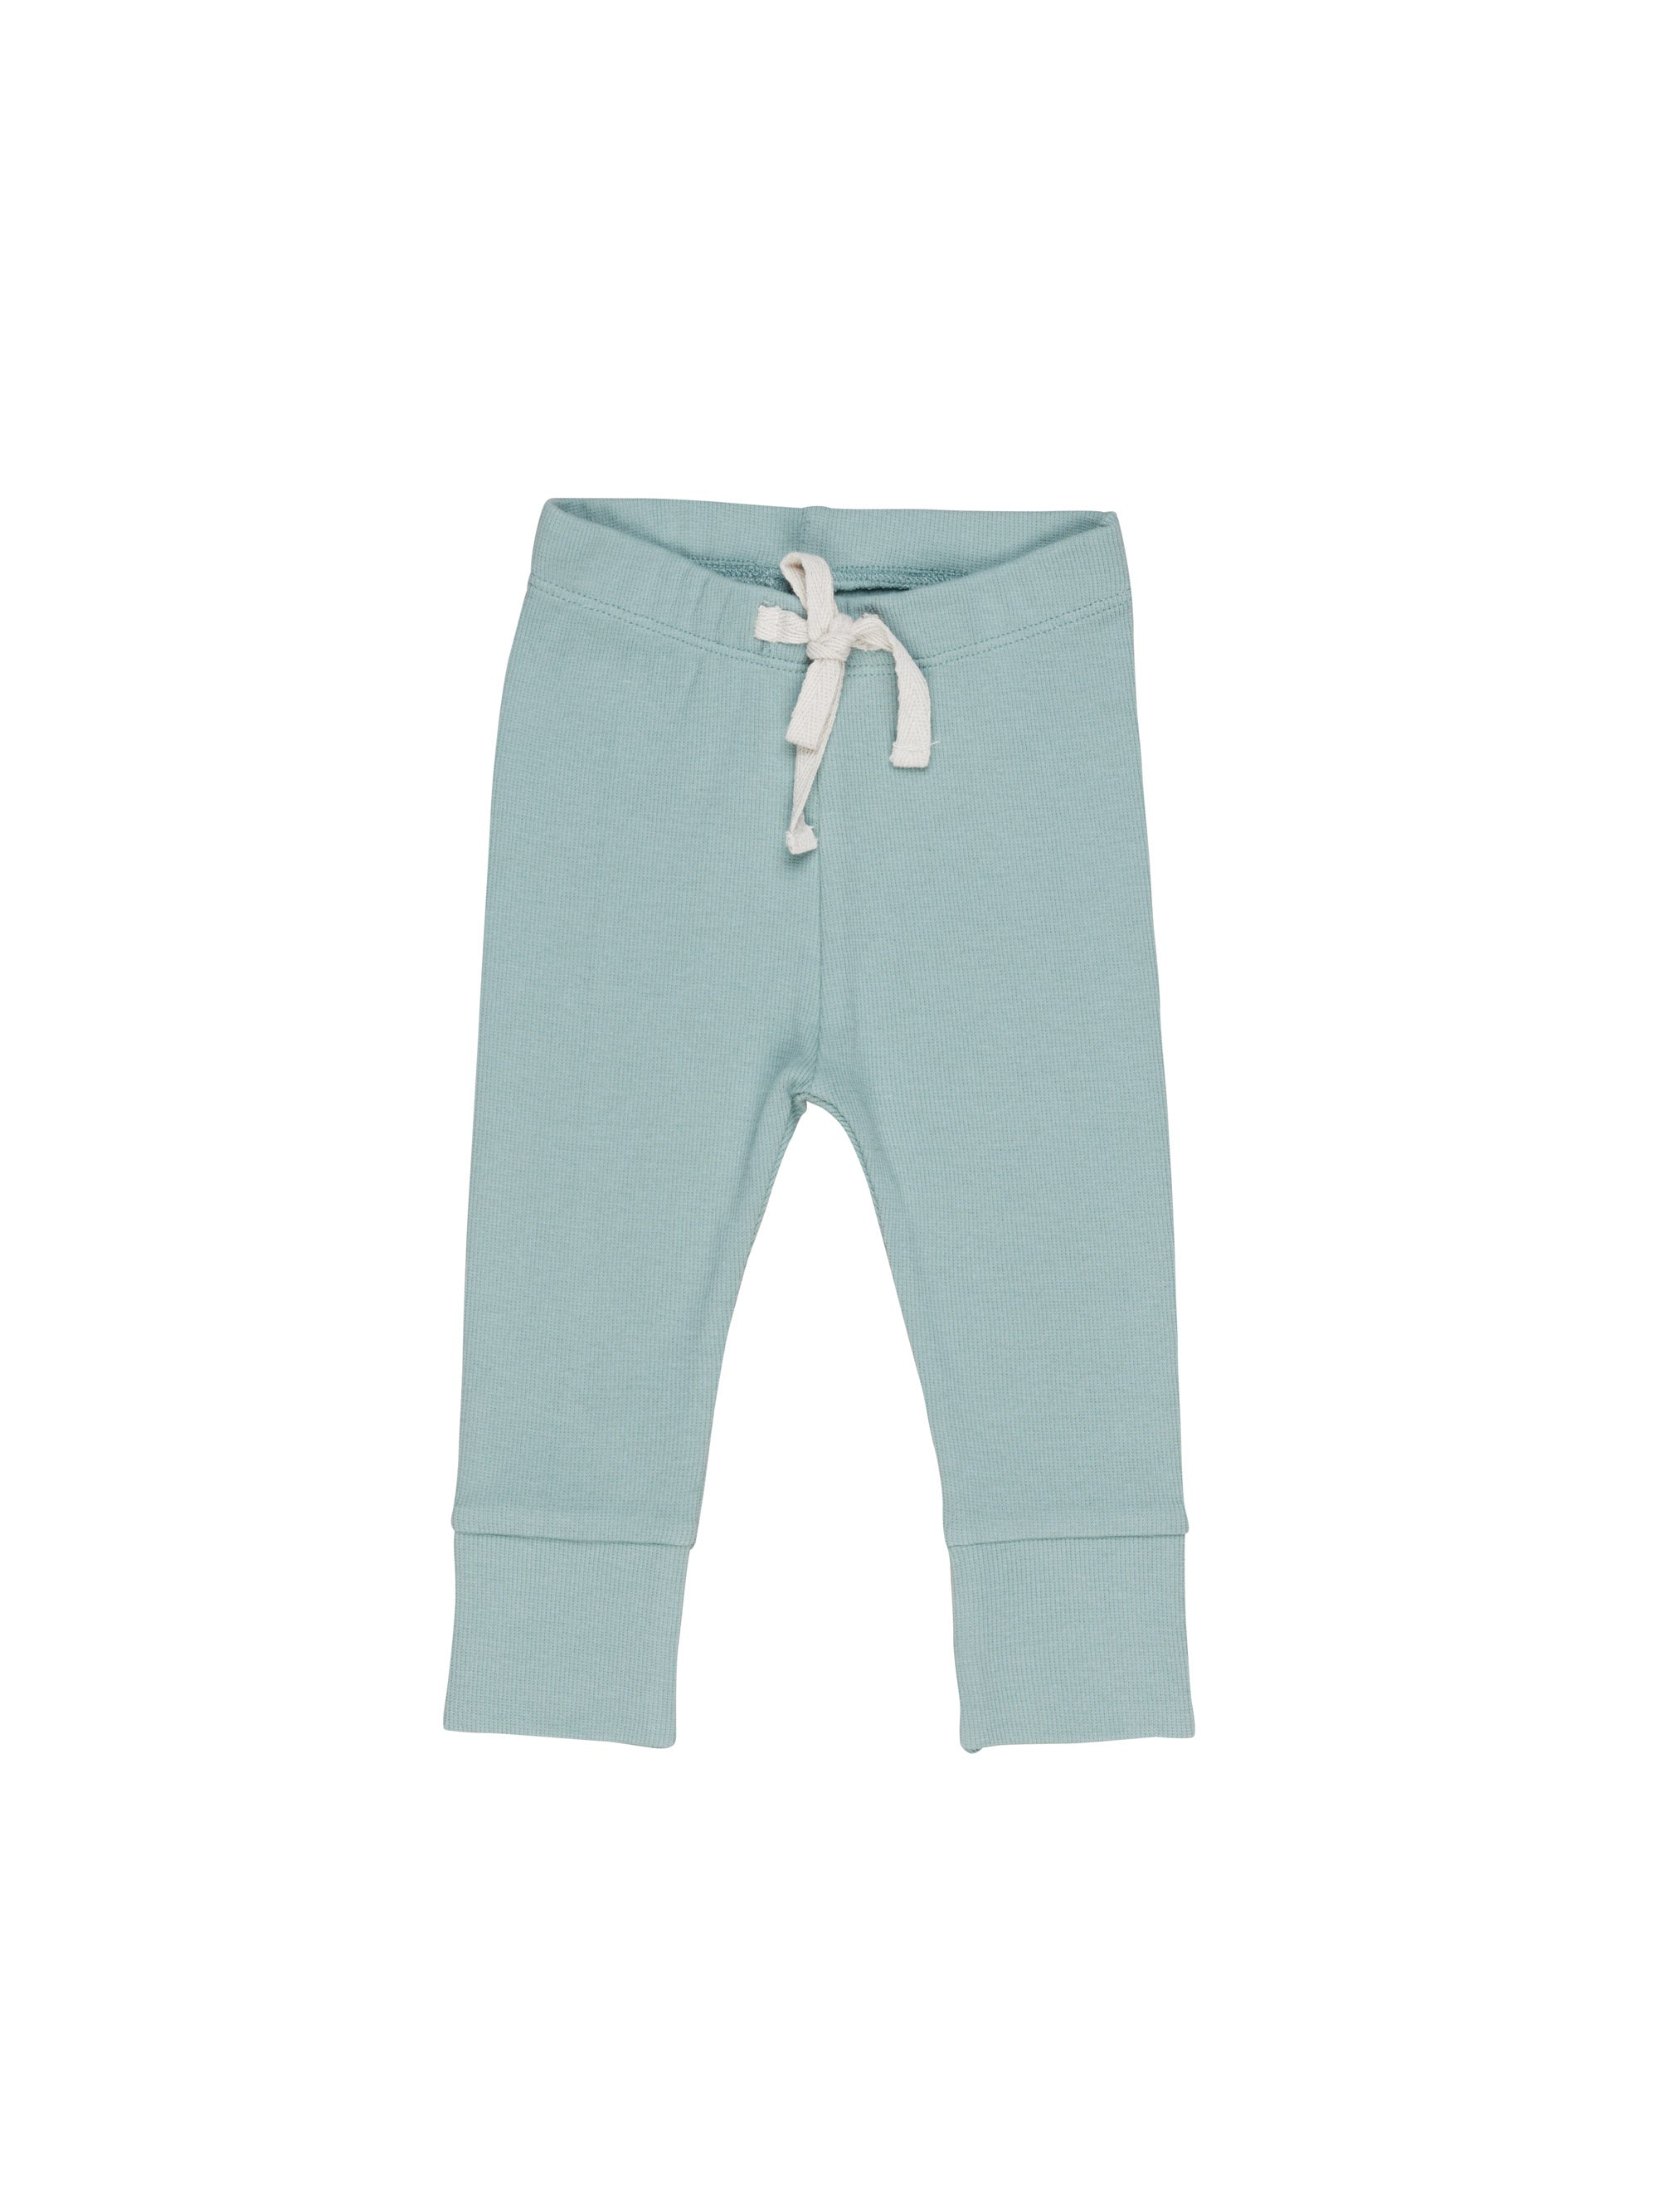 Buy Neutral Rib Jersey Leggings (3mths-7yrs) from Next Lithuania